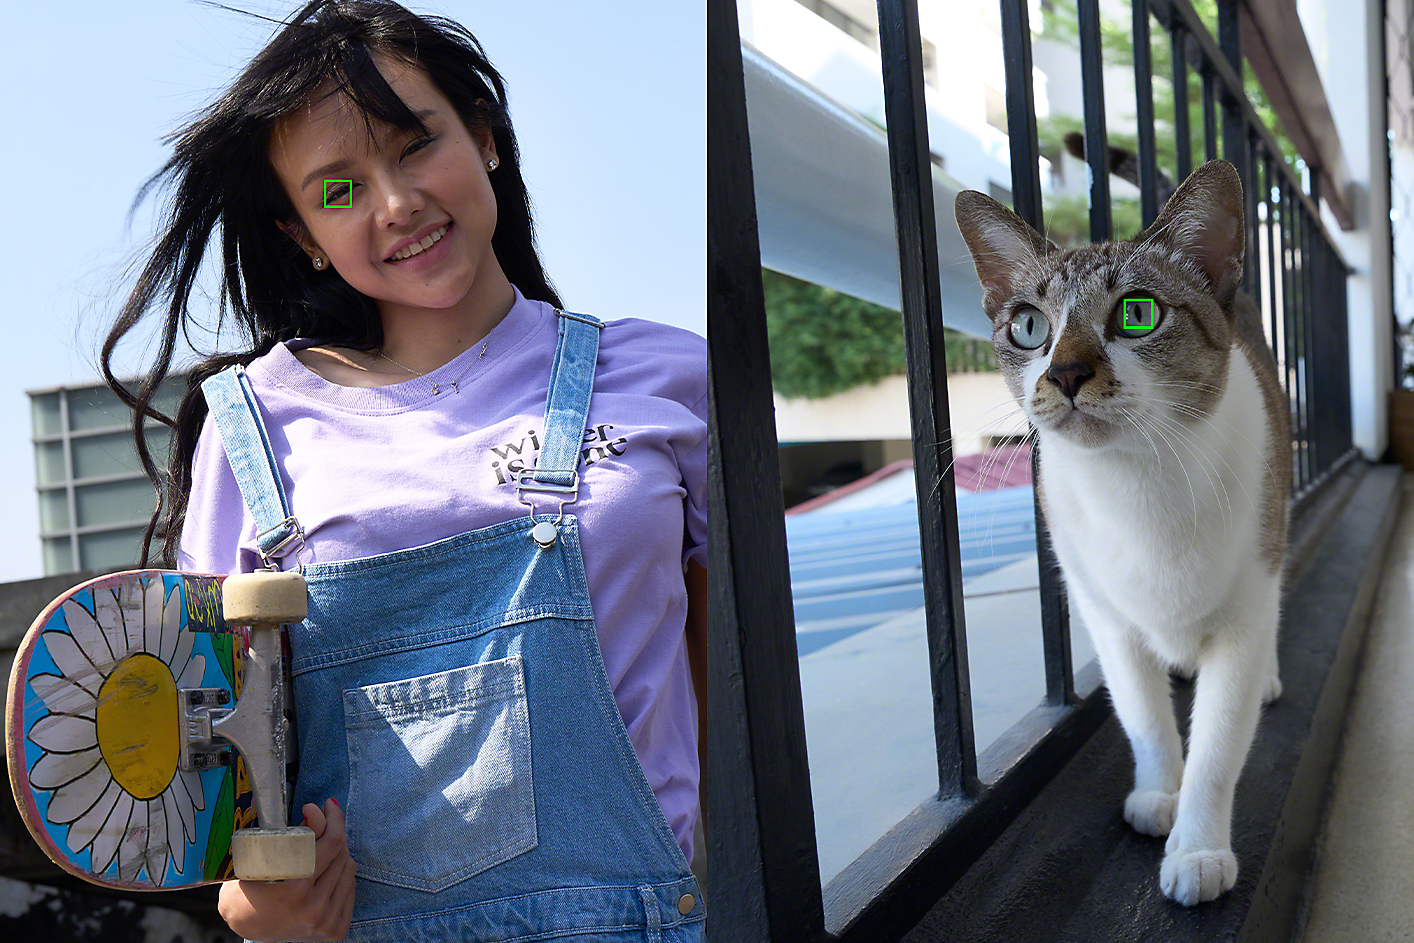 Portraits of a skateboarder and a cat – each subject has a small green square over one eye, indicating the Eye AF function